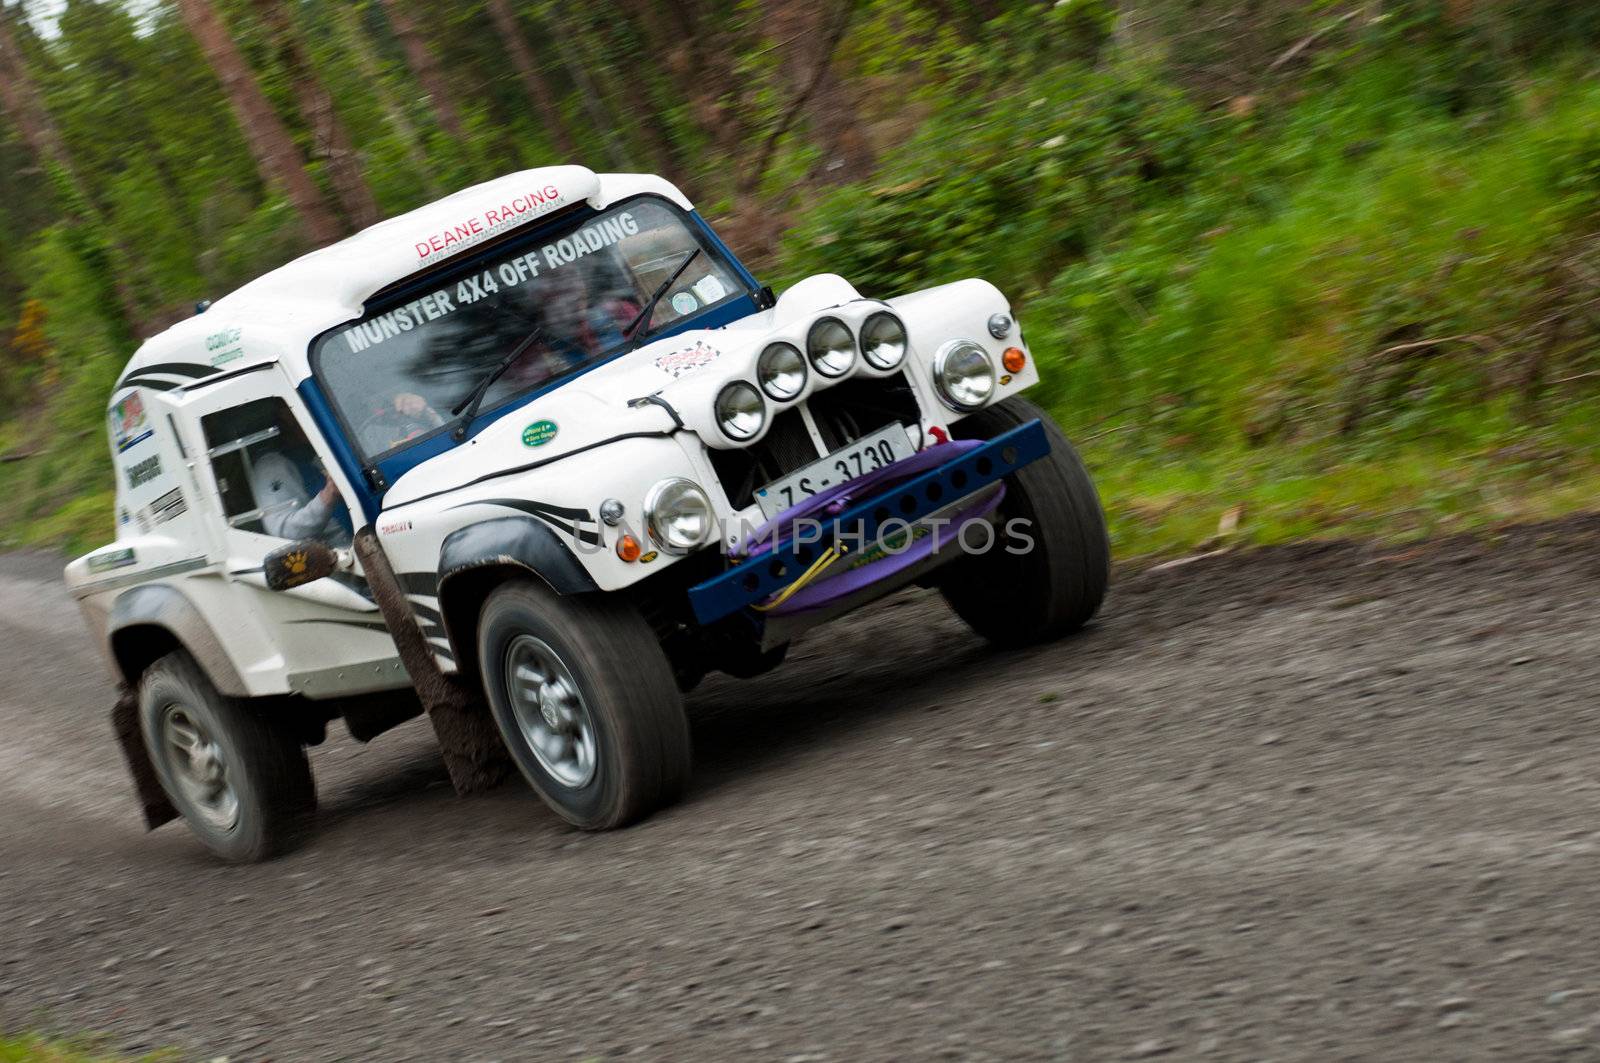 MALLOW, IRELAND - MAY 19: unidentified driver on Land Rover Tomcat at the Jim Walsh Cork Forest Rally on May 19, 2012 in Mallow, Ireland. 4th round of the Valvoline National Forest Rally Championship.